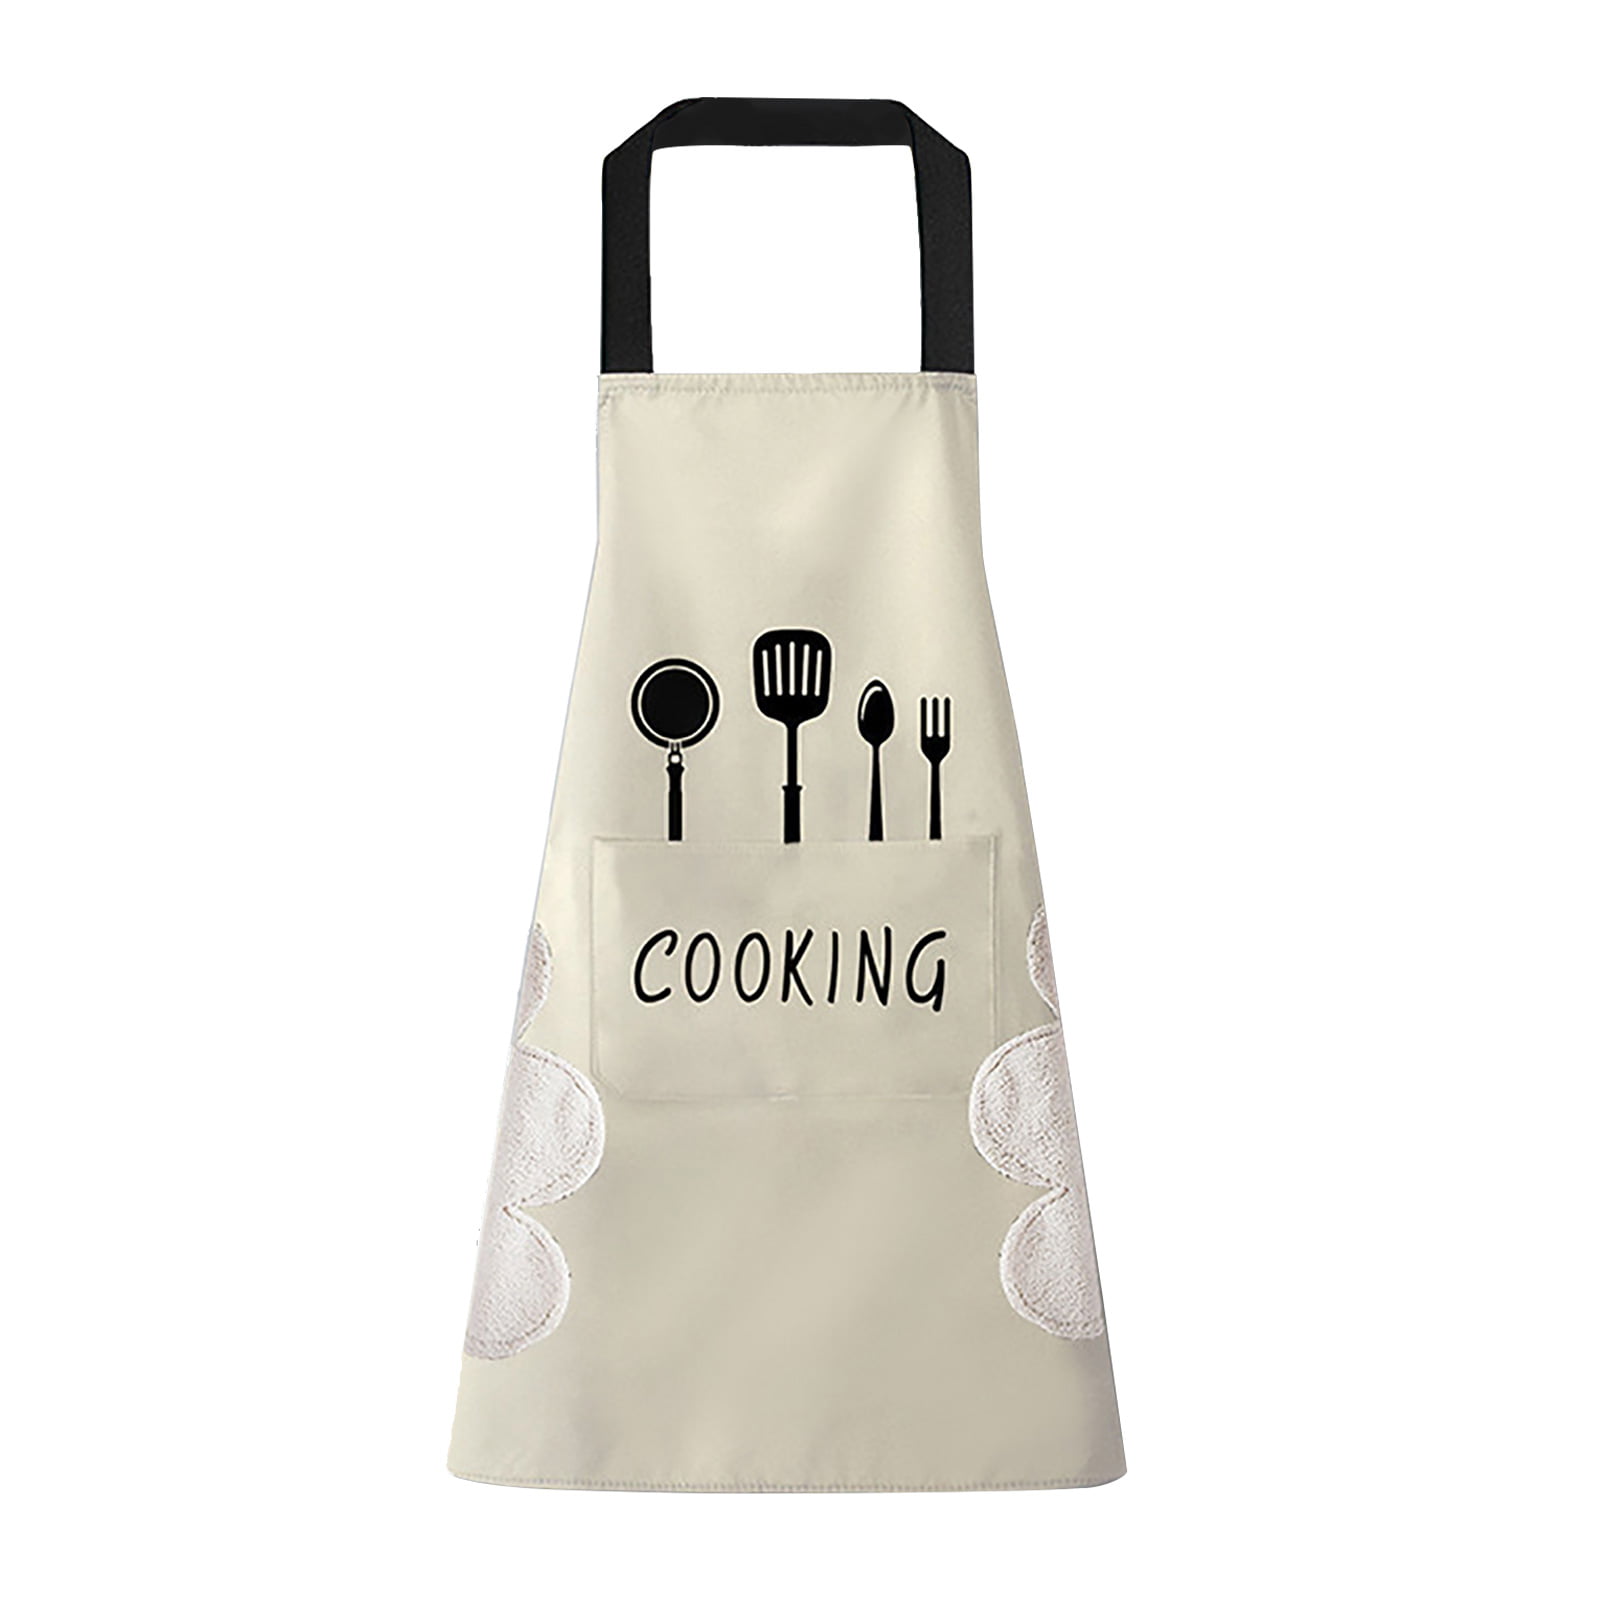 Fathers Day Birthday Gifts for Dad. Funny Apron for Men & Women with Two Tool Pocket Professional Grill Apron Adjustable Neck Strap Waterproof and OilProof Best for Grilling